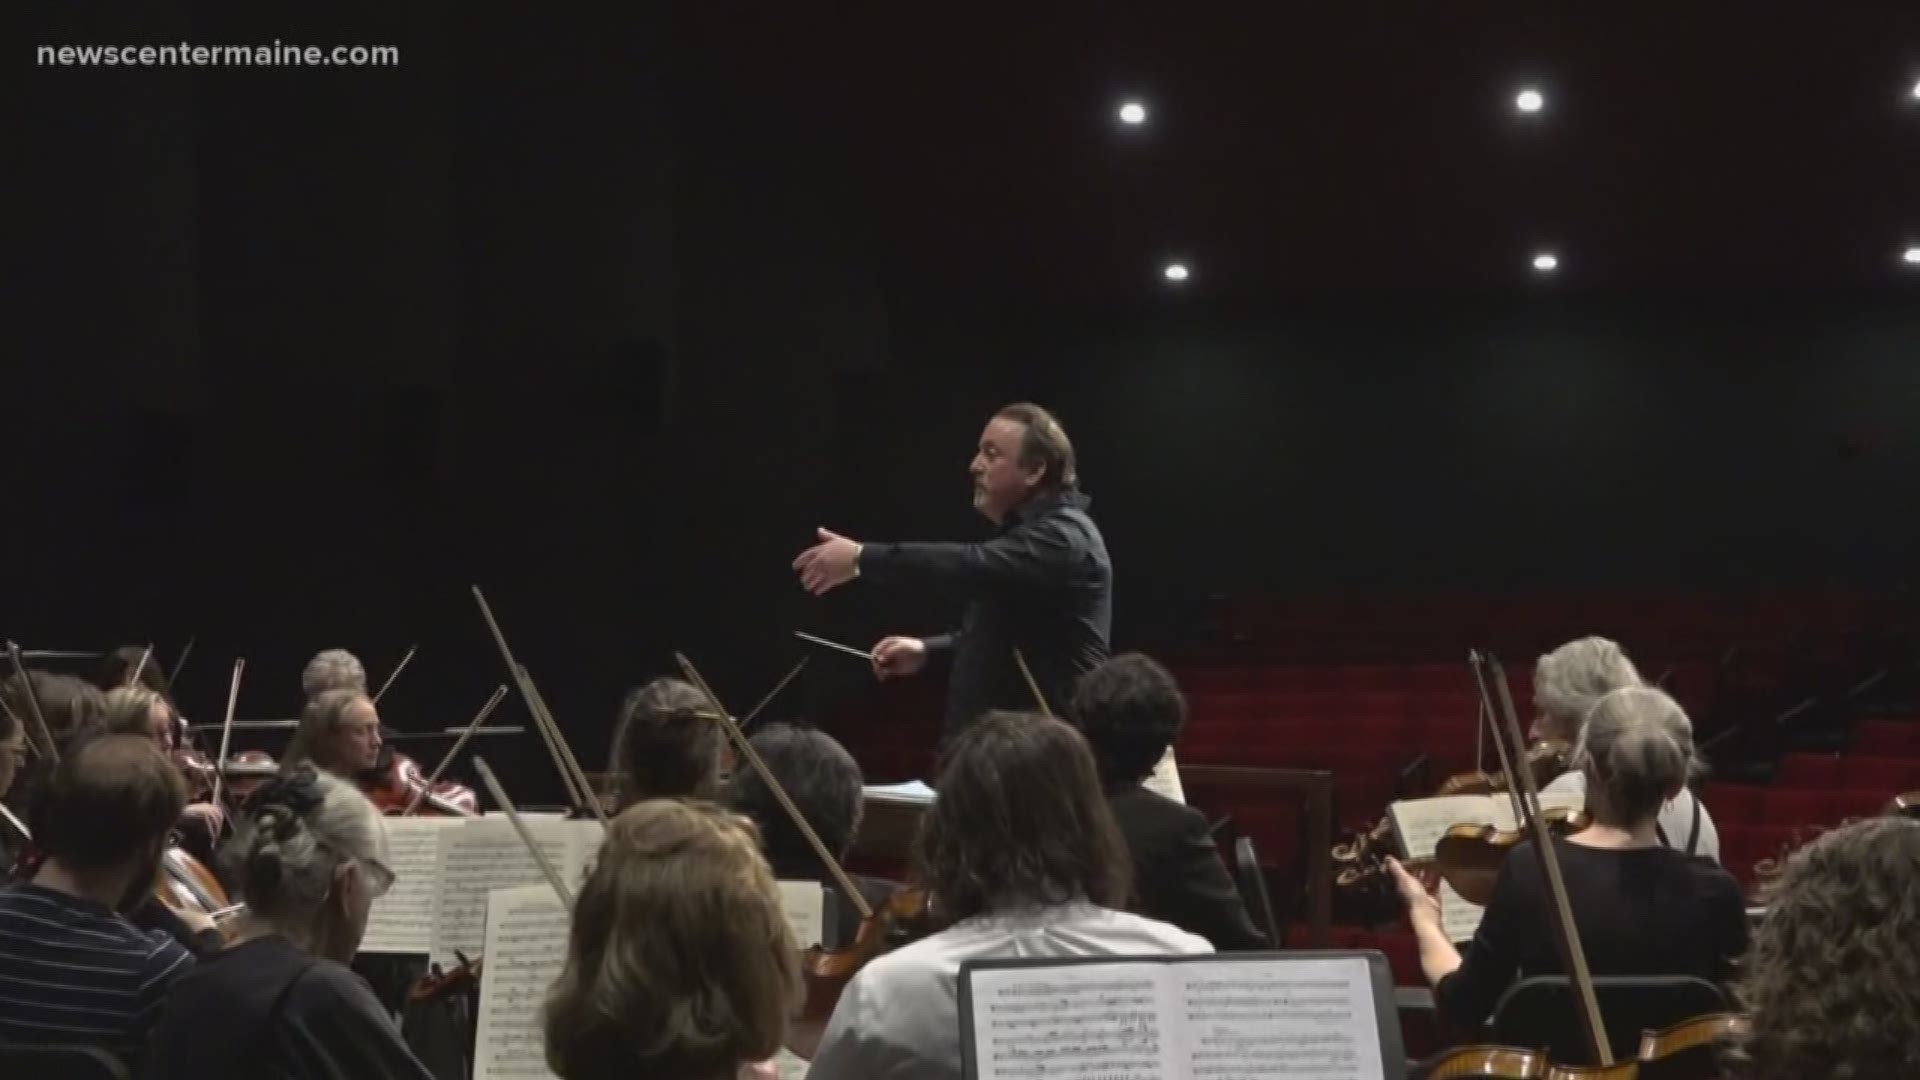 NEWS CENTER Maine sat down with Lucas Richman, who is entering his tenth season as conductor for the Bangor Symphony Orchestra.